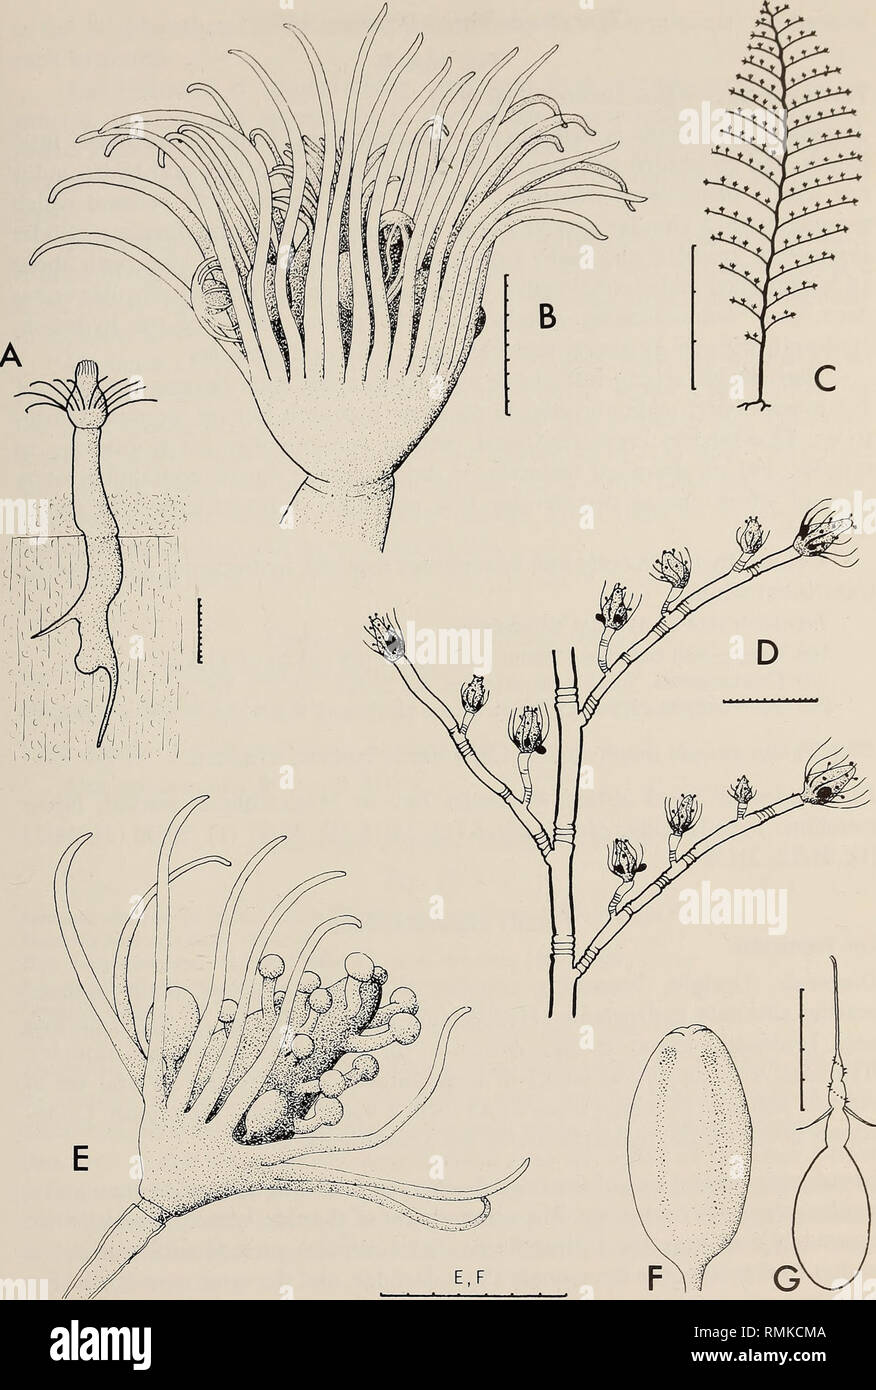 . Annals of the South African Museum = Annale van die Suid-Afrikaanse Museum. Natural history. MONOGRAPH ON THE HYDROIDA OF SOUTHERN AFRICA 39. Fig. 16. Zyzzyzus solitarius. A, hydranth growing in sponge and showing rooting structures; B, mature hydranth with gonophores and escaping actinulae. Halocordyle disticha. C, stem; D, part of stem and hydrocladia; E, hydranth with gonophores; F, gonophore; G, large stenotele. Scale: C in cm, G in /xm, the rest in mm/10.. Please note that these images are extracted from scanned page images that may have been digitally enhanced for readability - colorat Stock Photo